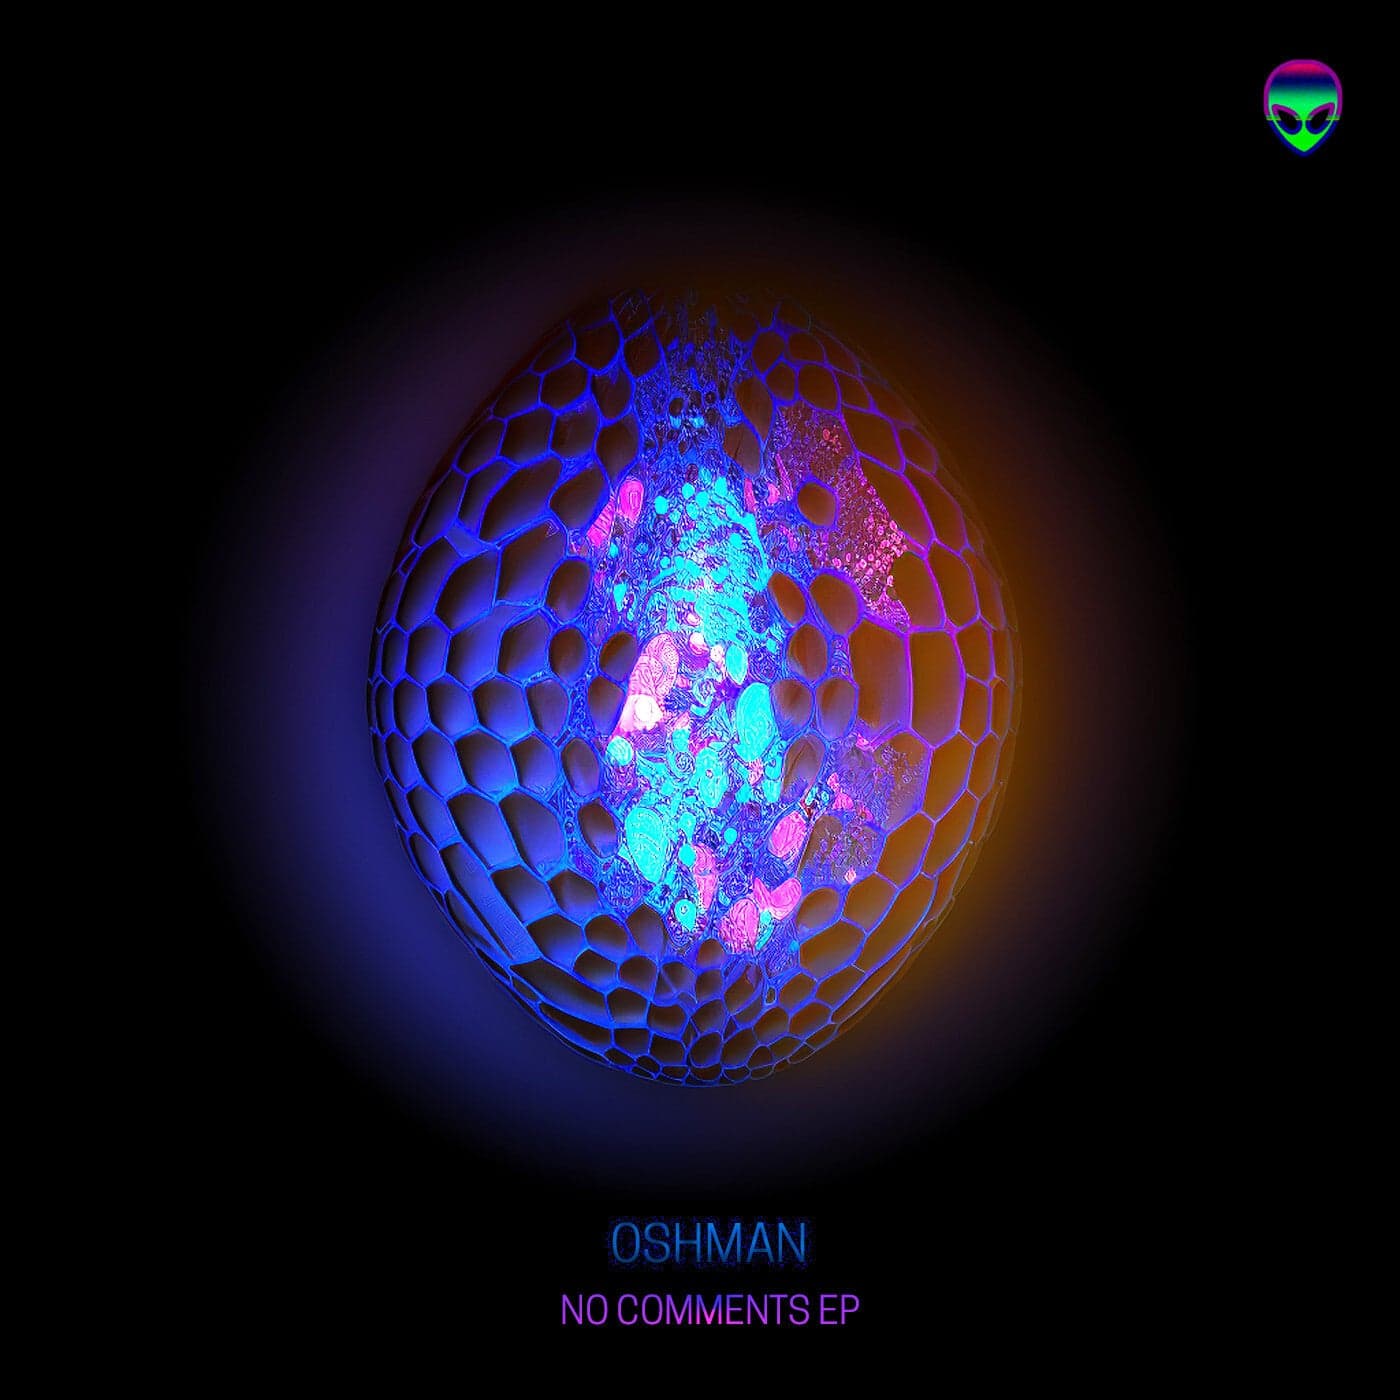 image cover: Oshman - No Comments EP on Music4Aliens